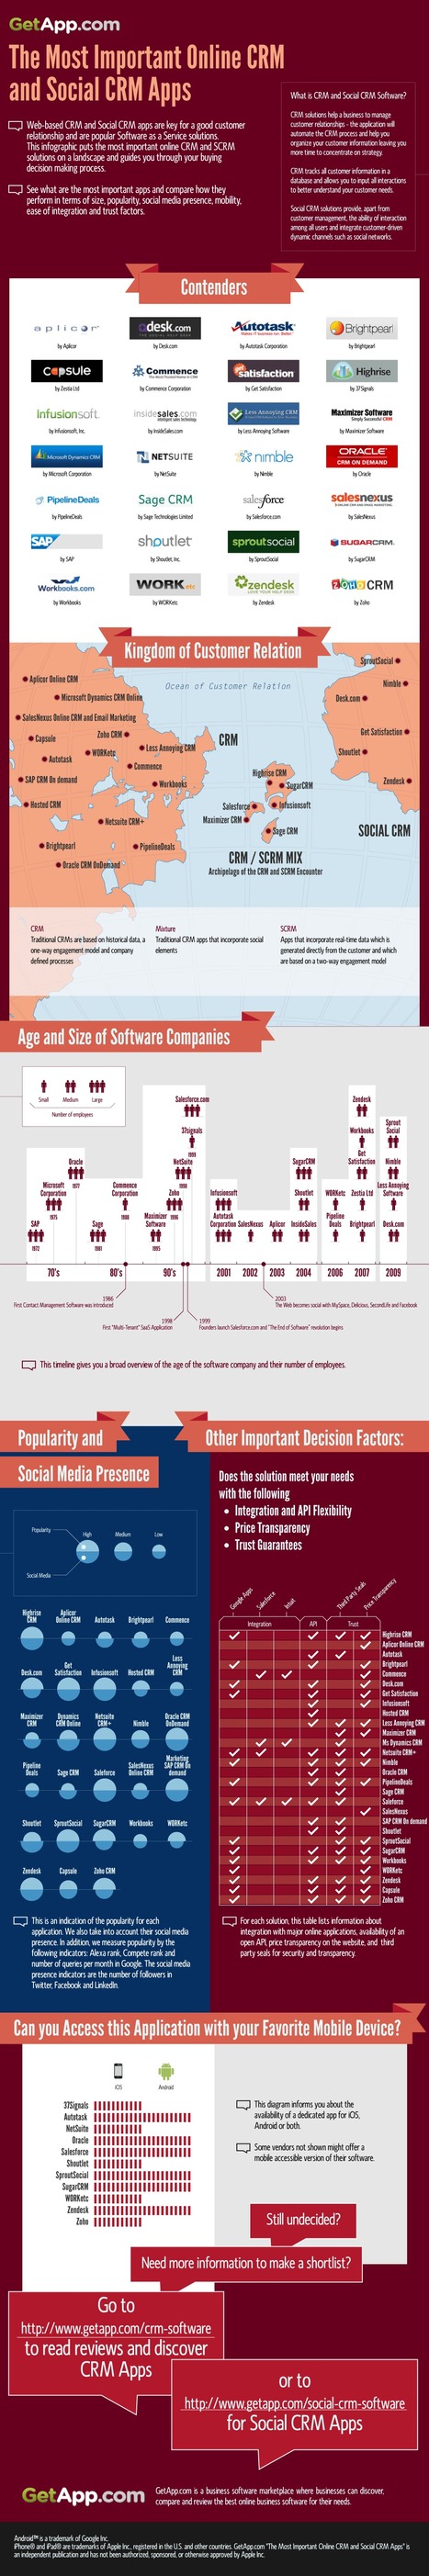 Does Social Customer Relationship Management (CRM) Exist? Maybe [Infographic] | Curation Revolution | Scoop.it